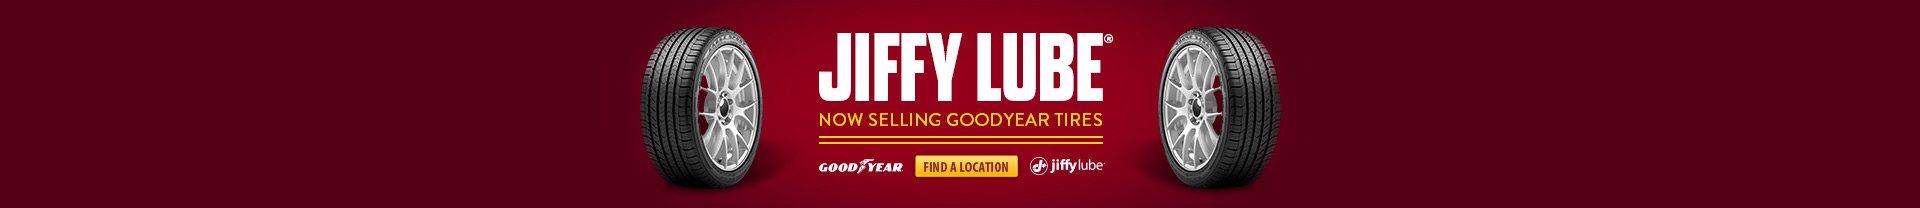 closest jiffy lube or fastlube